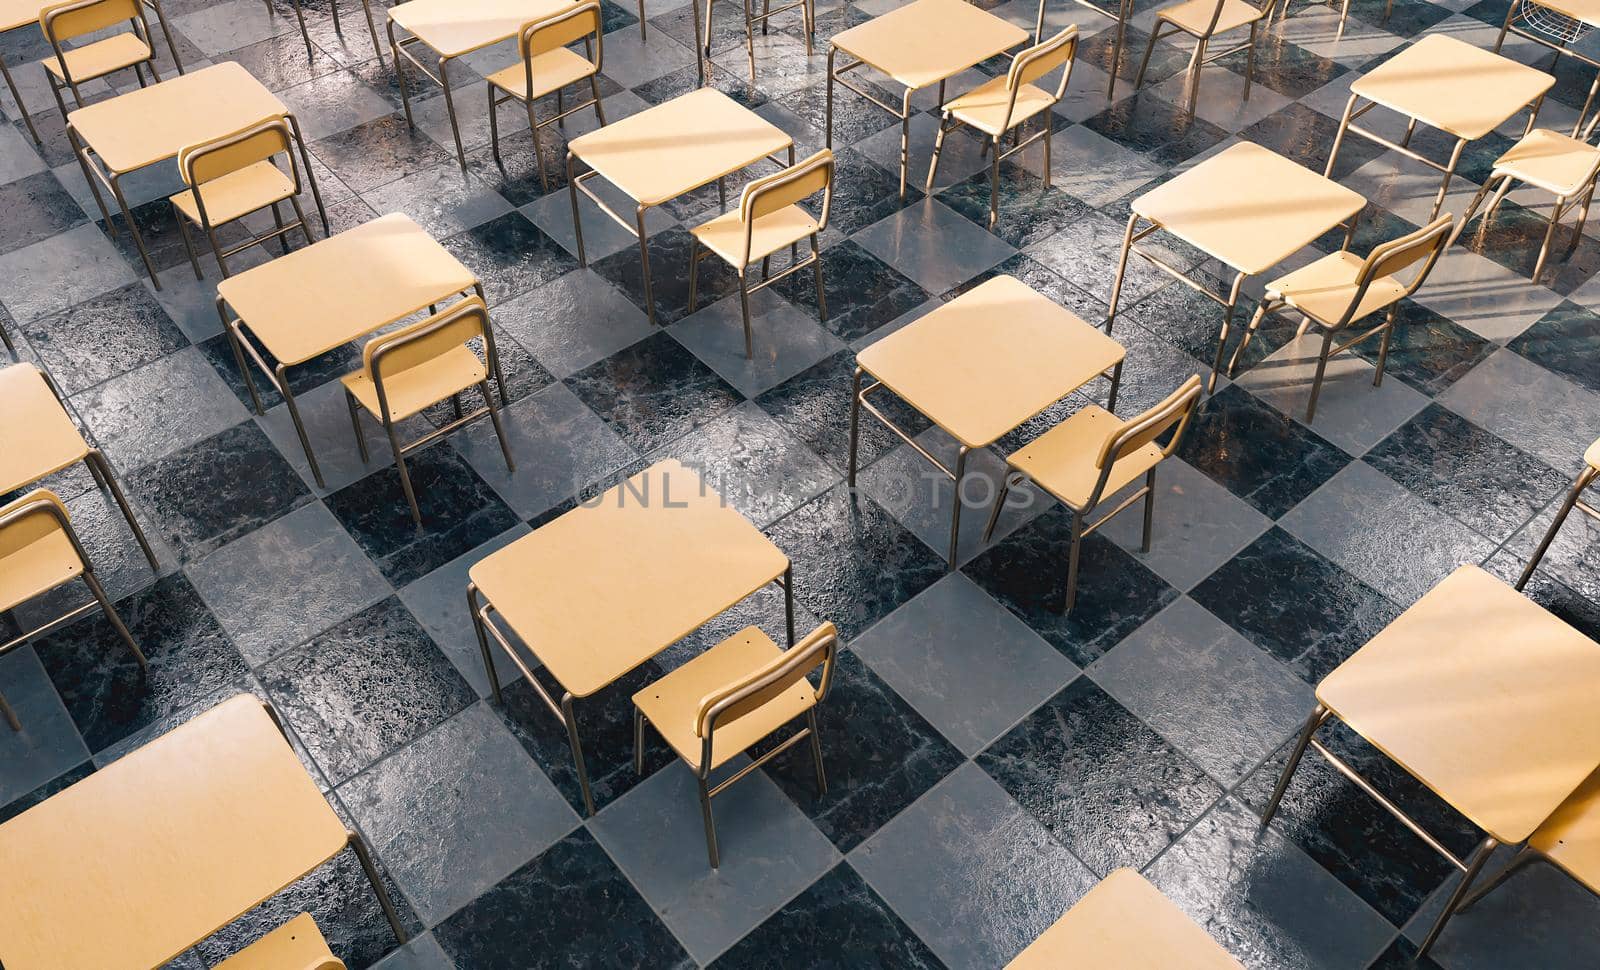 pattern of desks in an classroom seen from above by asolano